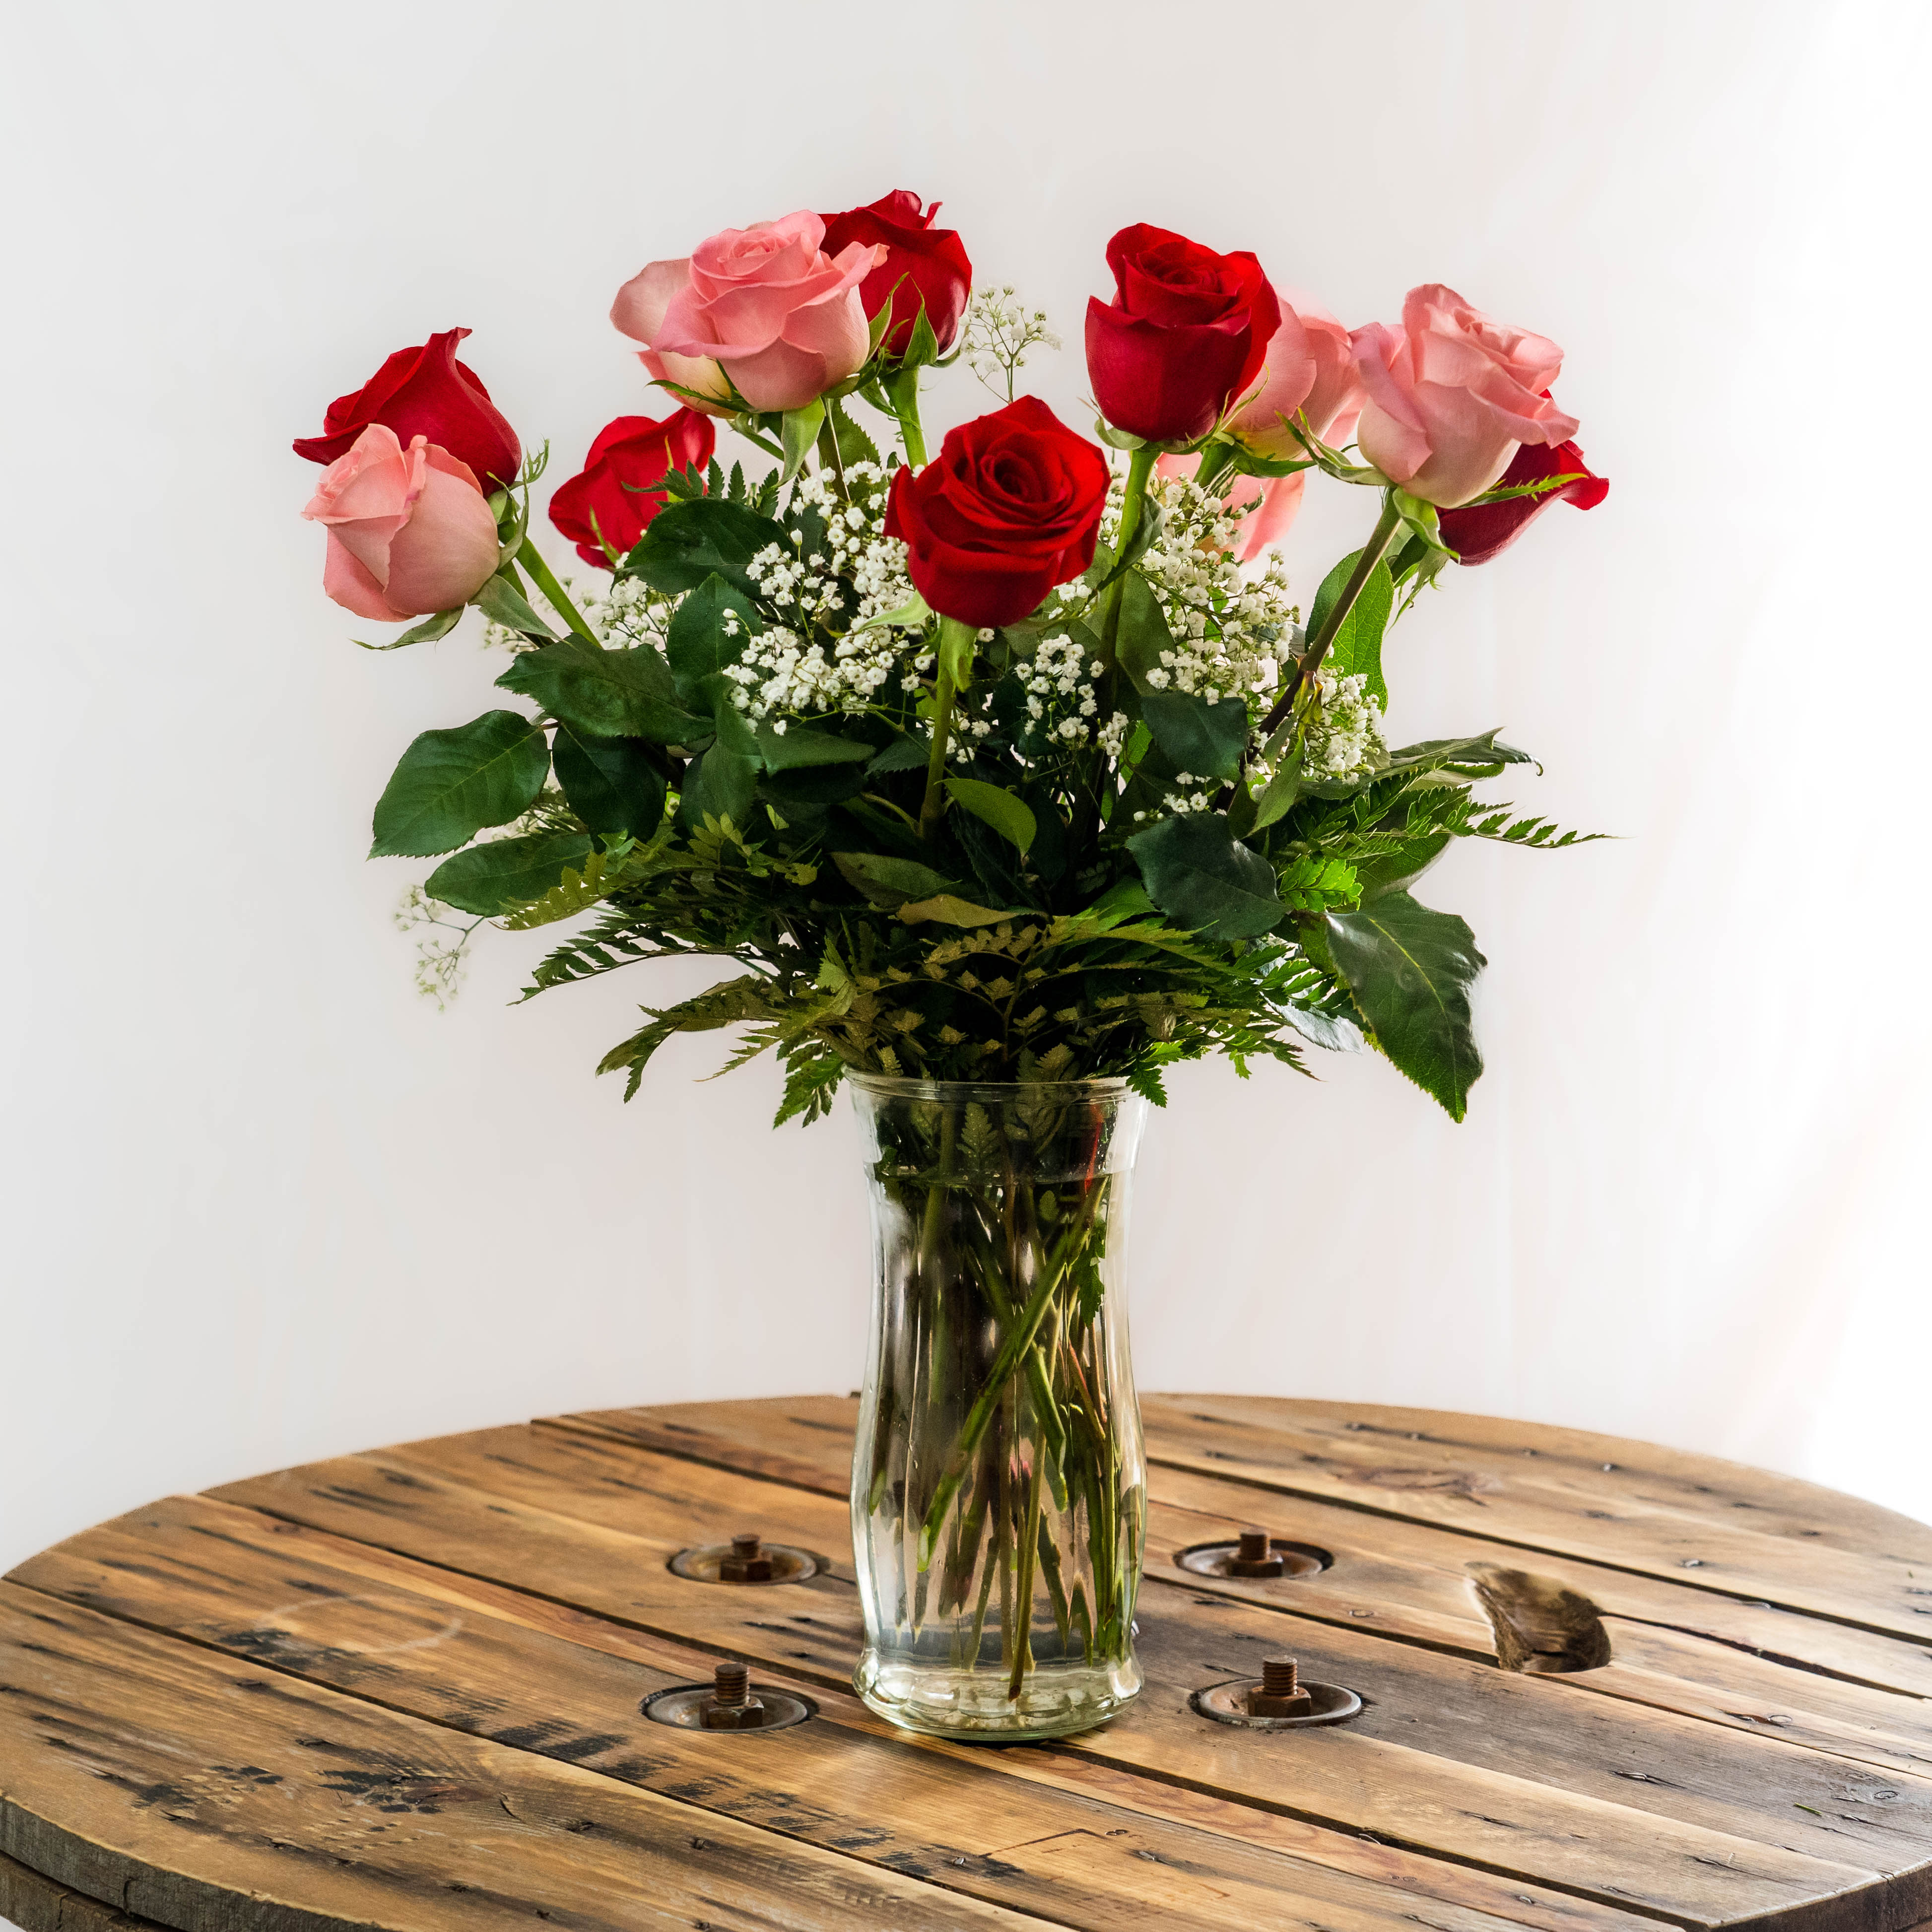 Lovely Dozen Roses Pink and Red - Mix and Match with Pink and Red Roses acc